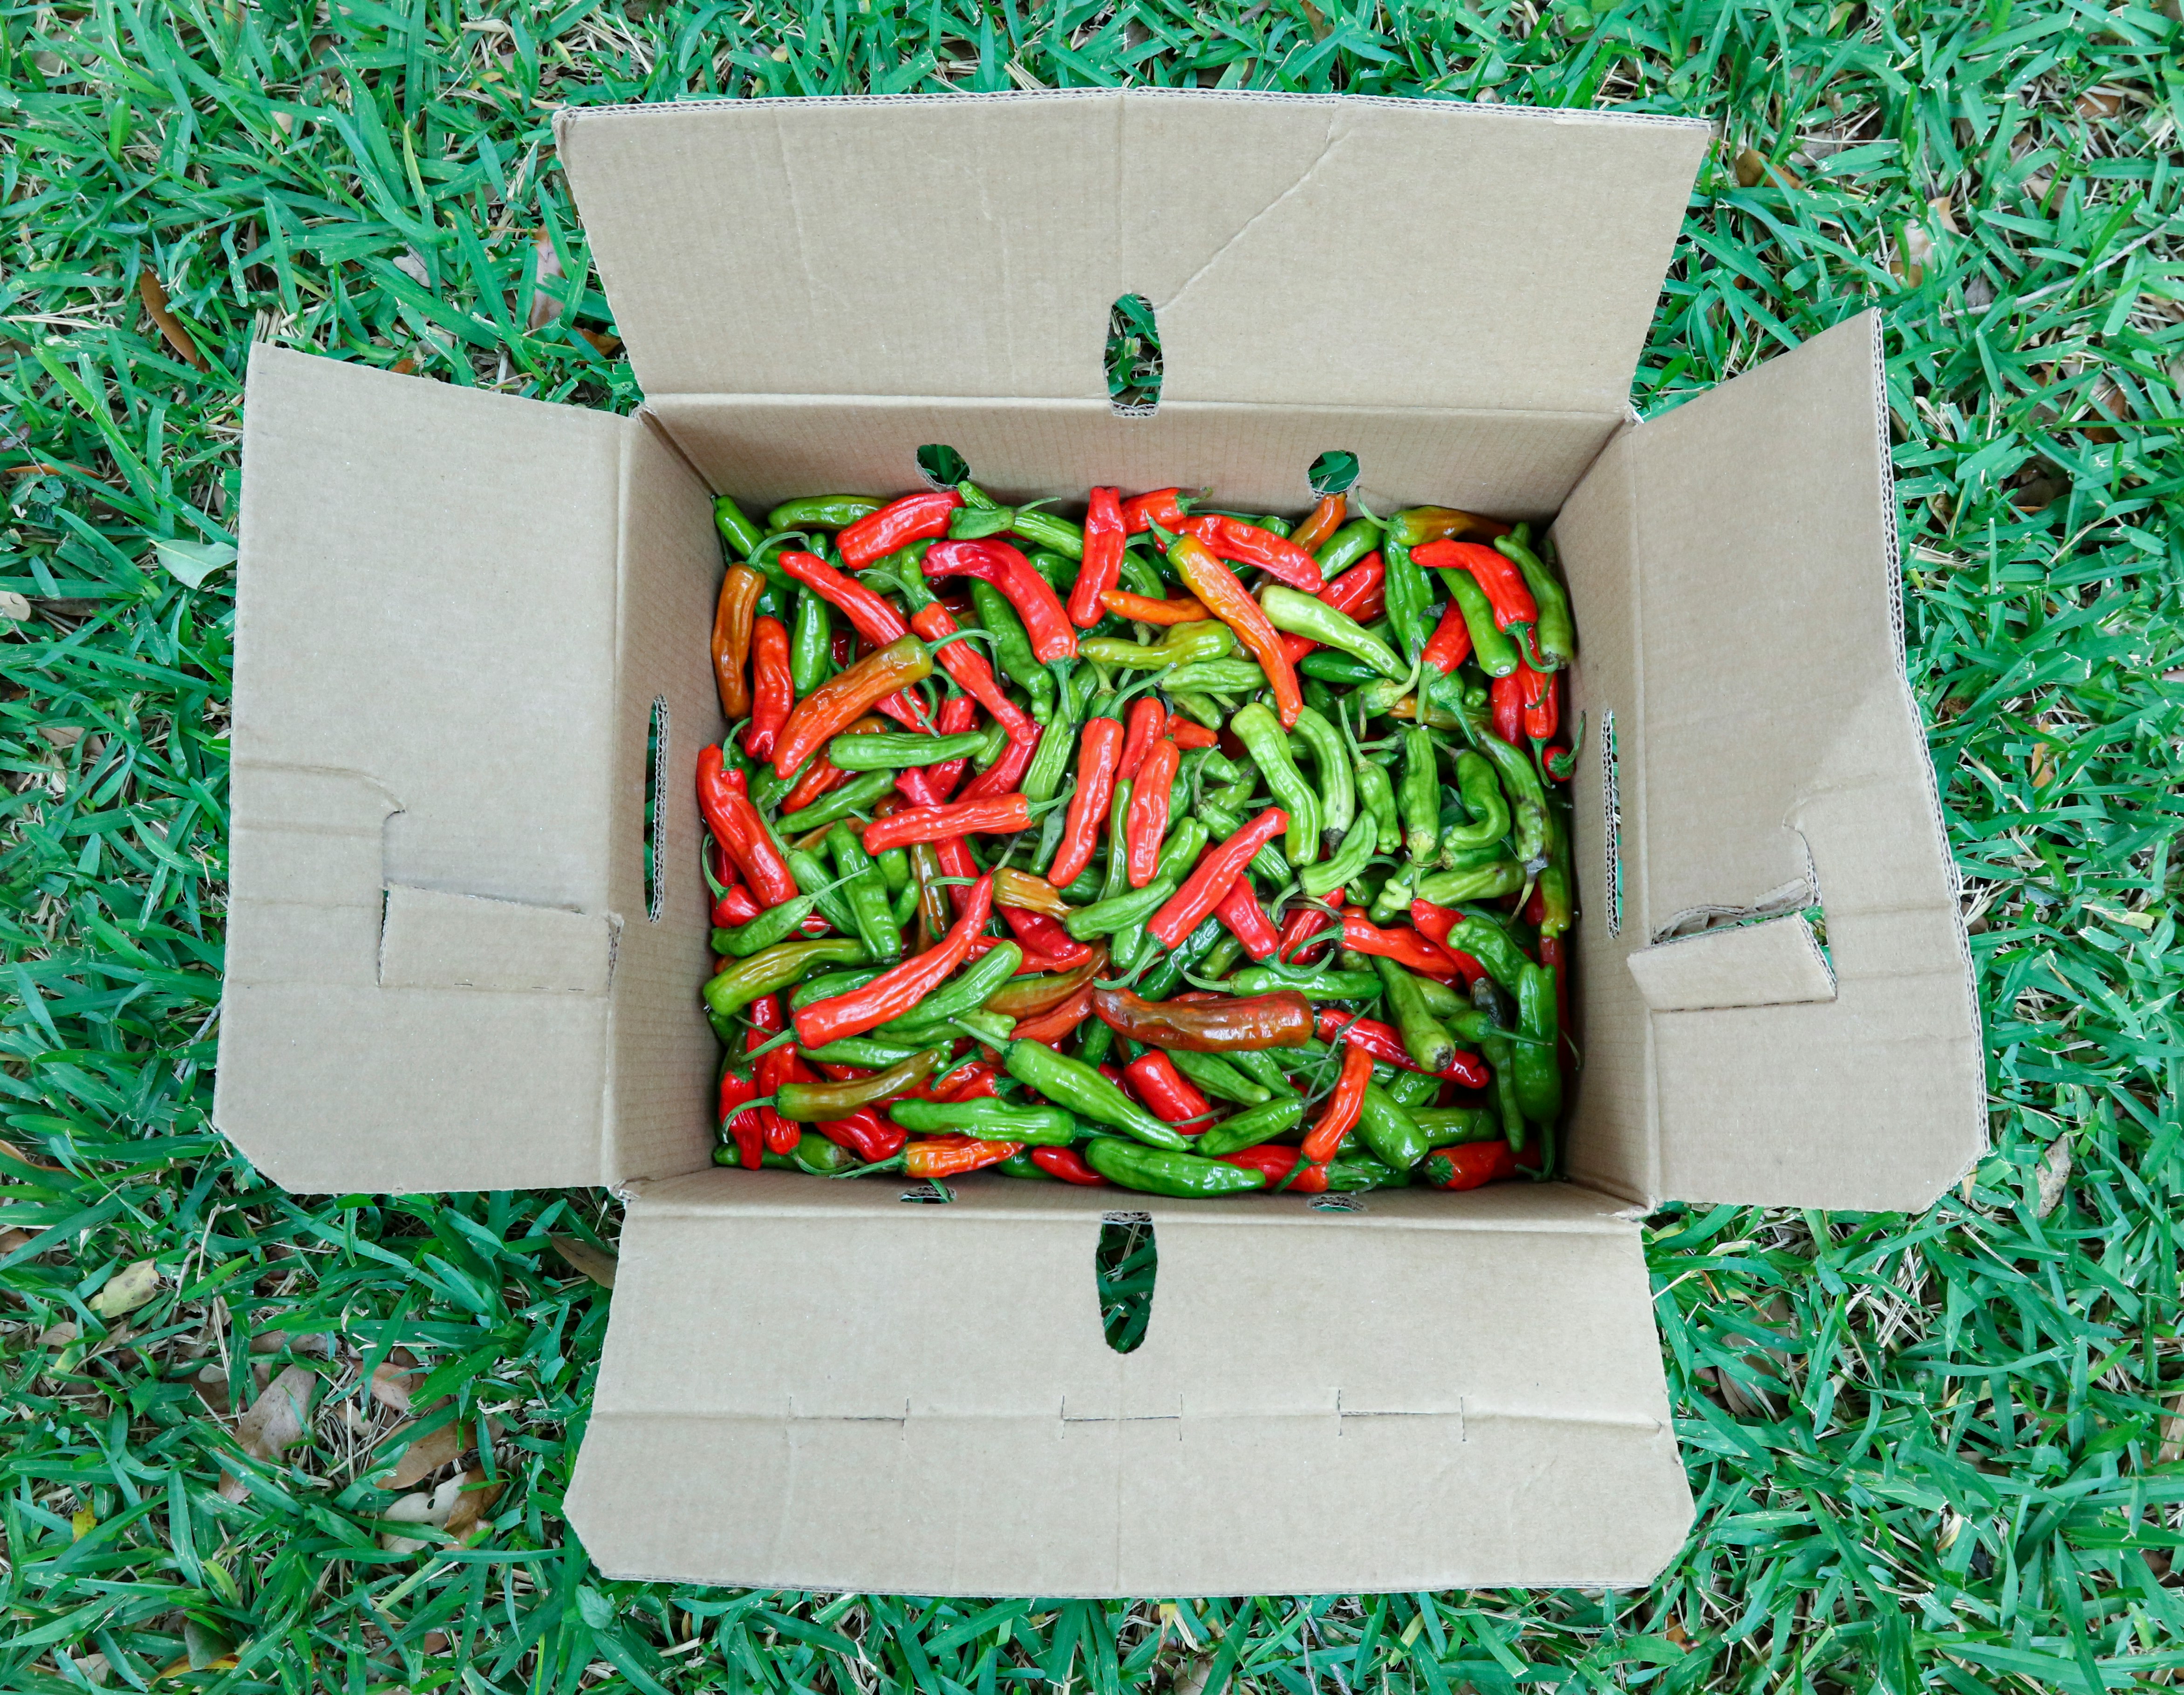 green and red chili peppers in brown cardboard box